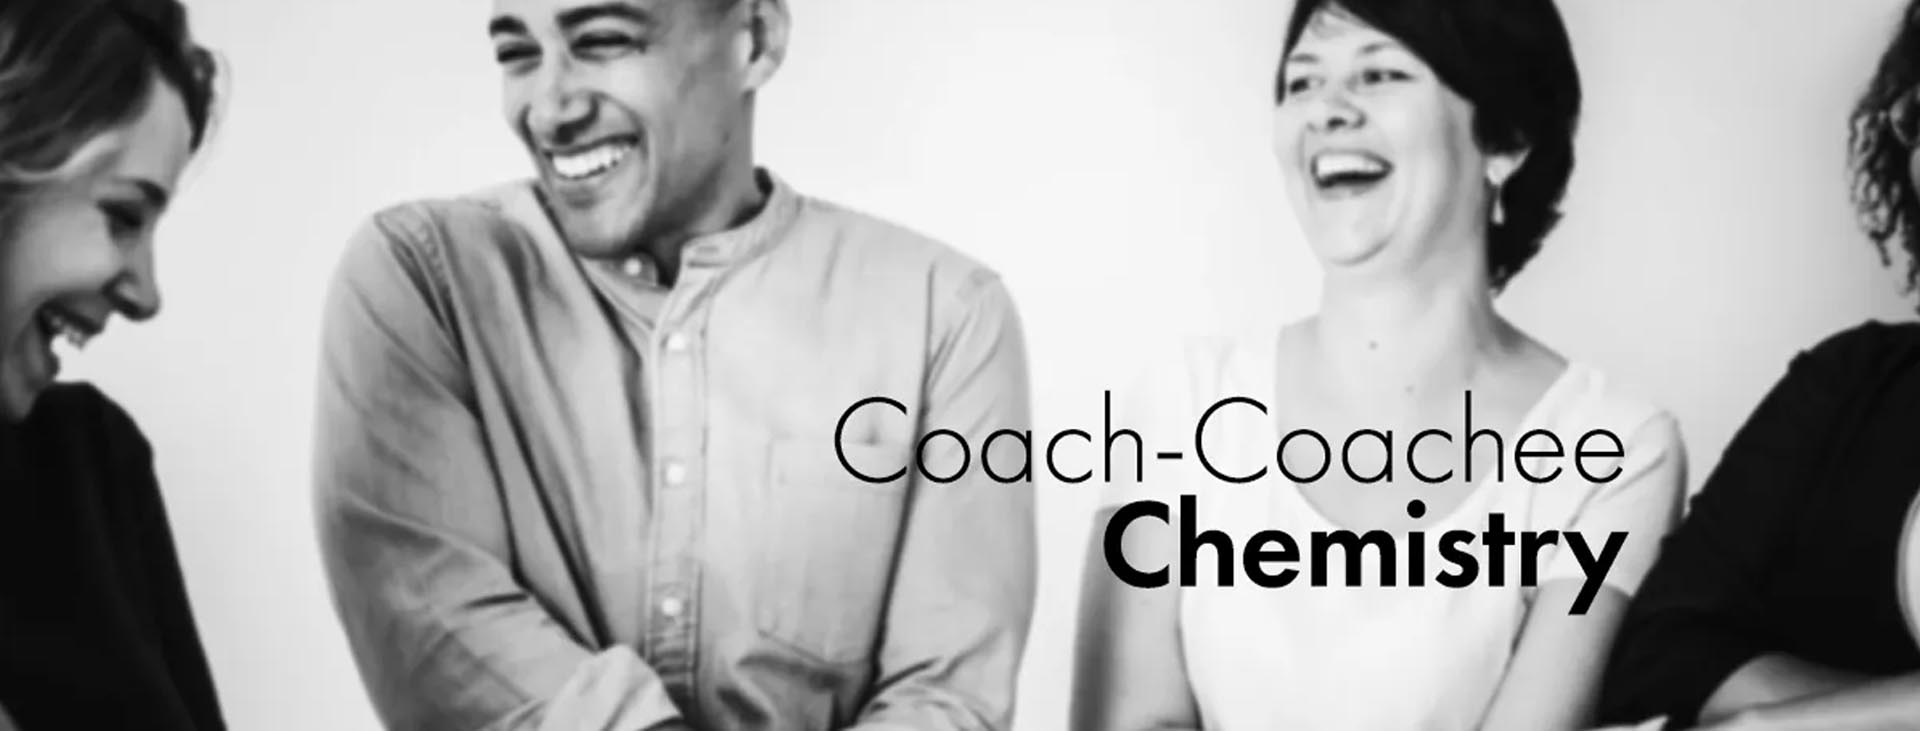 COACH-COACHEE CHEMISTRY CHARTS GREAT CAREERS